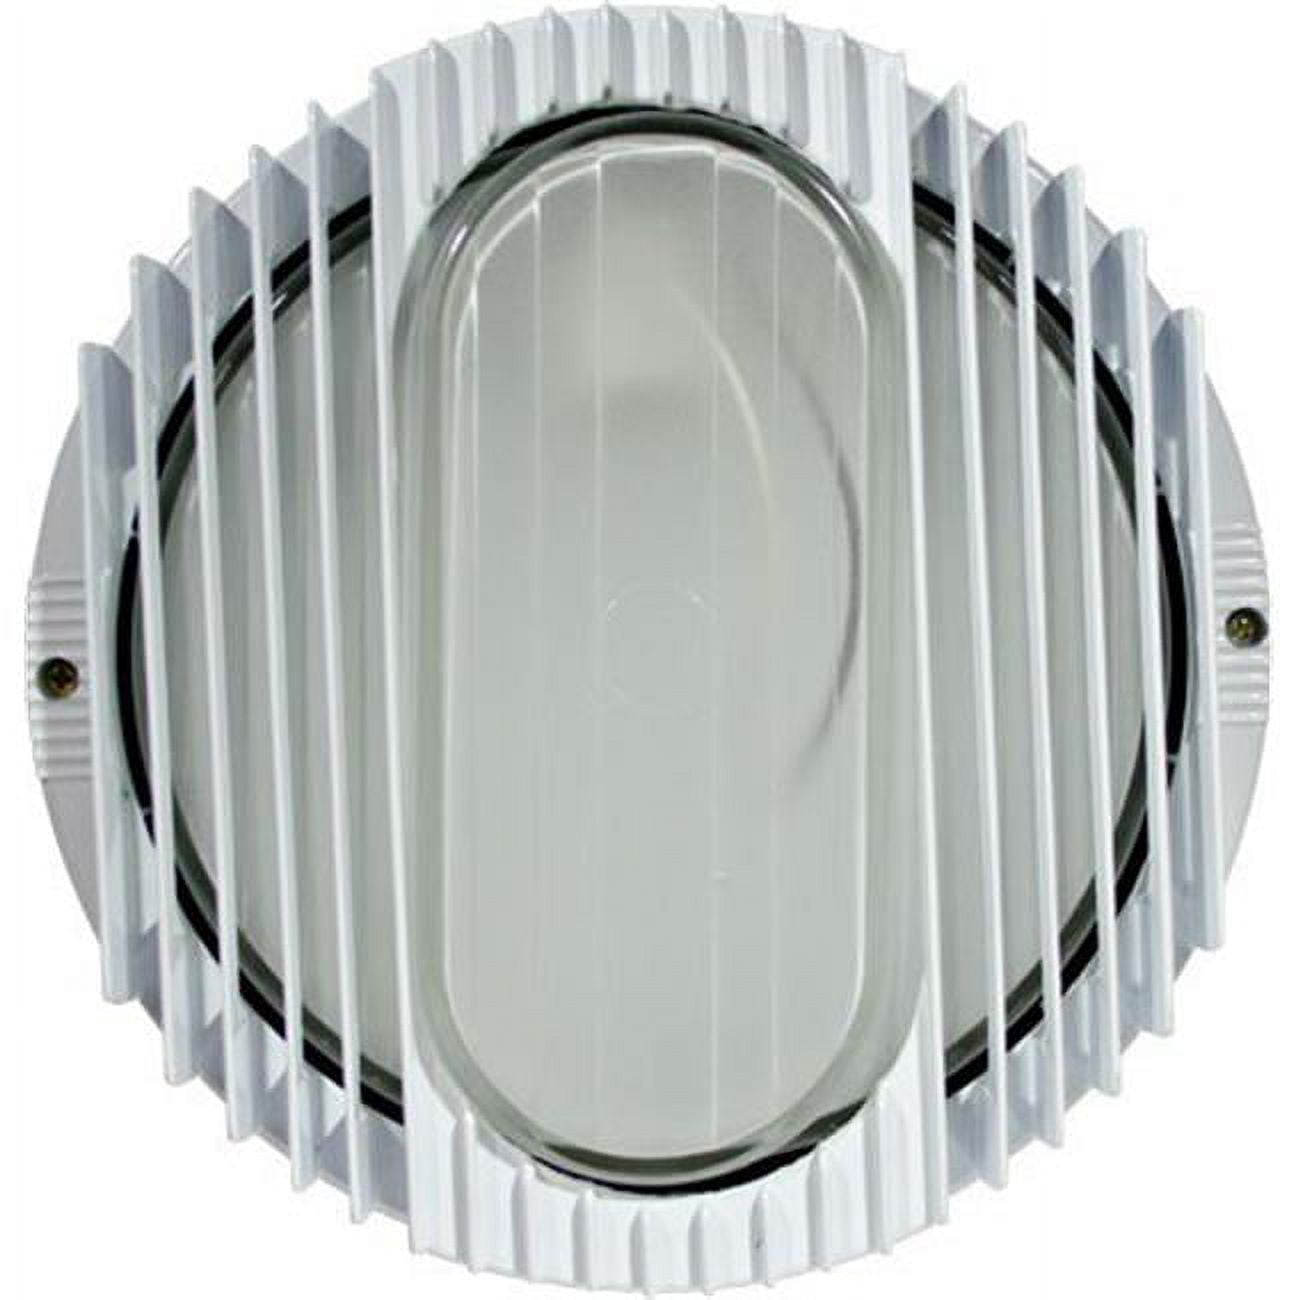 Picture of Dabmar Lighting W3063-W Surface Mount Wall Fixture - 13W 120V, White